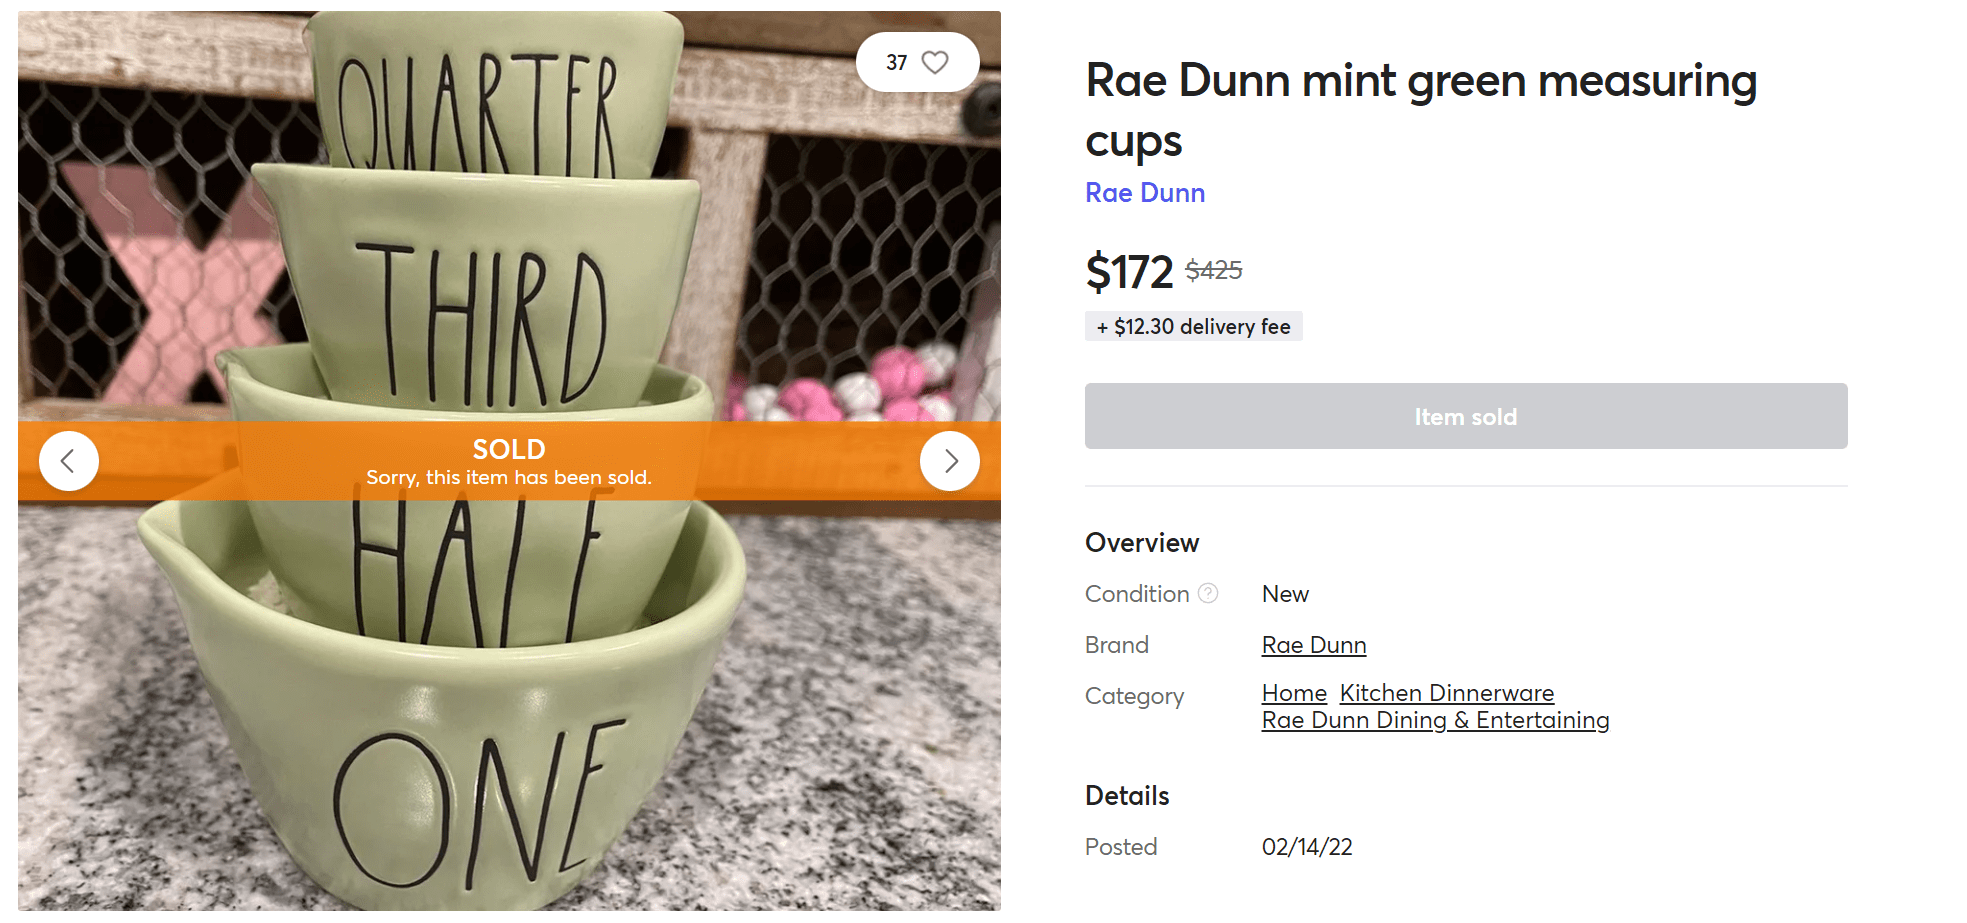 Rae Dunn Measuring Cups and the Collectors Buying Them - Resell Calendar